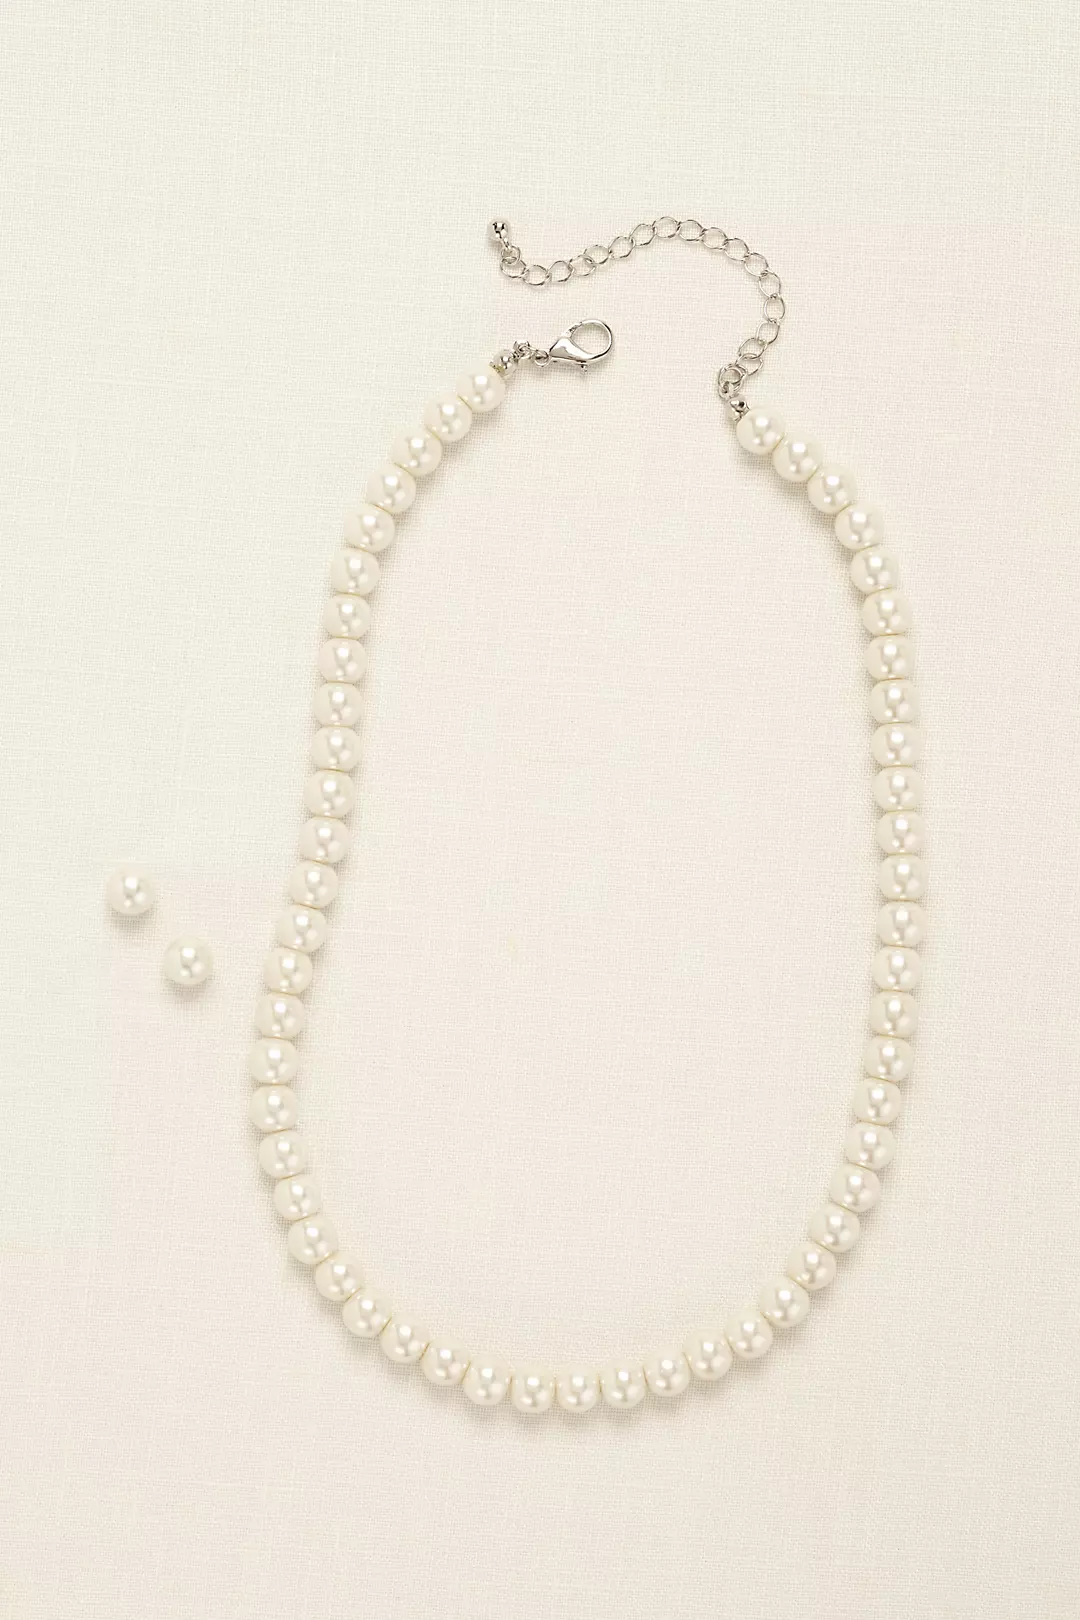 Classic Pearl Necklace and Earring Set Image